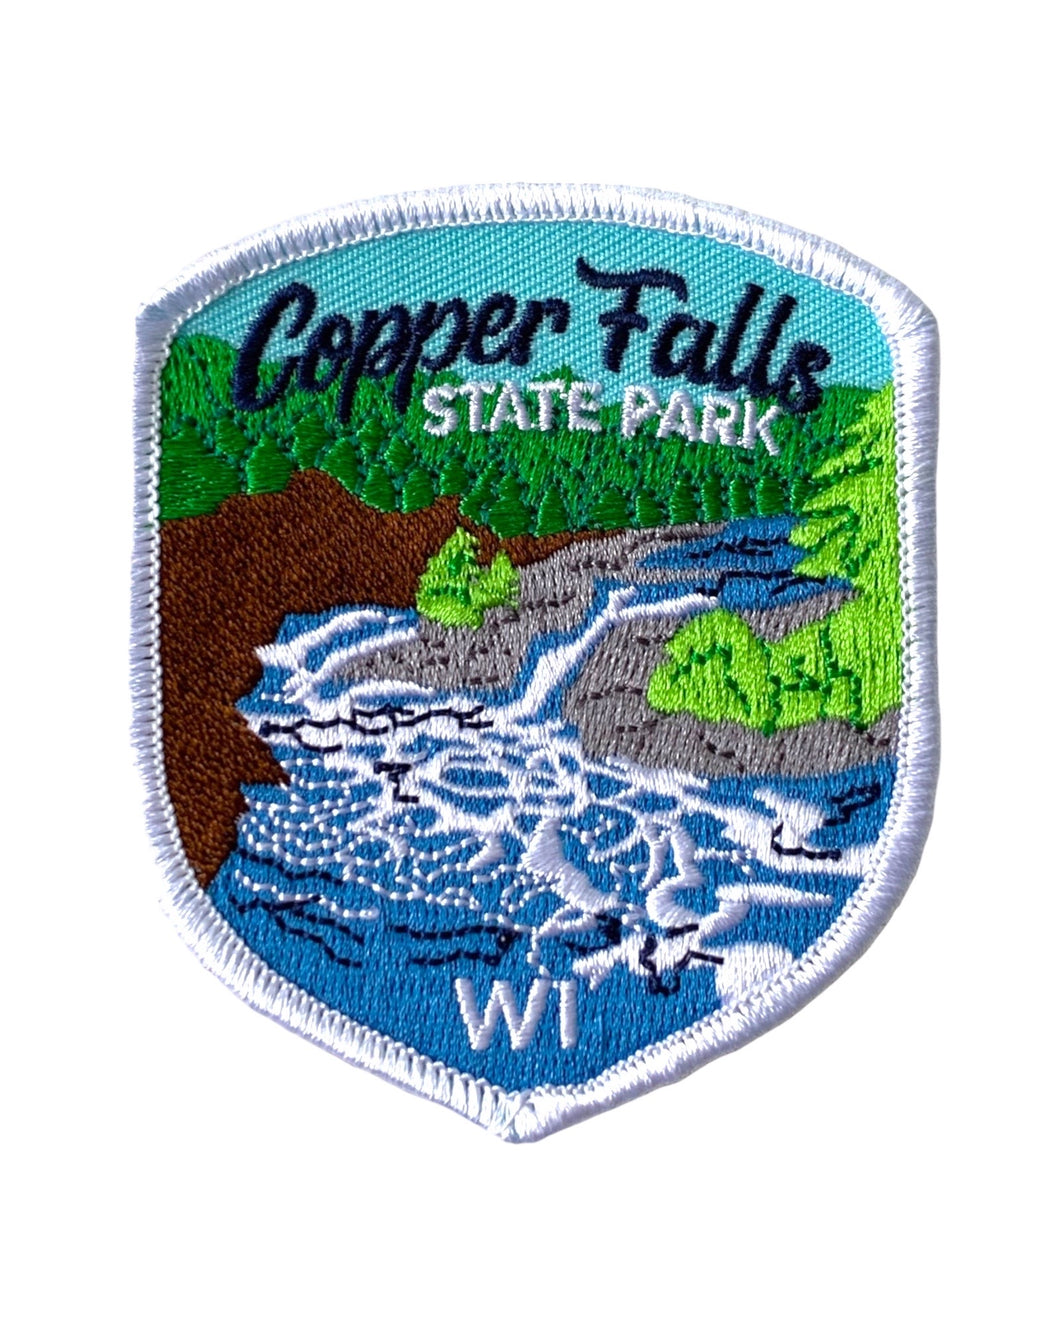 COPPER FALLS STATE PARK WISCONSIN COLLECTOR PATCH. Available For Sale Online at Toad Tackle.